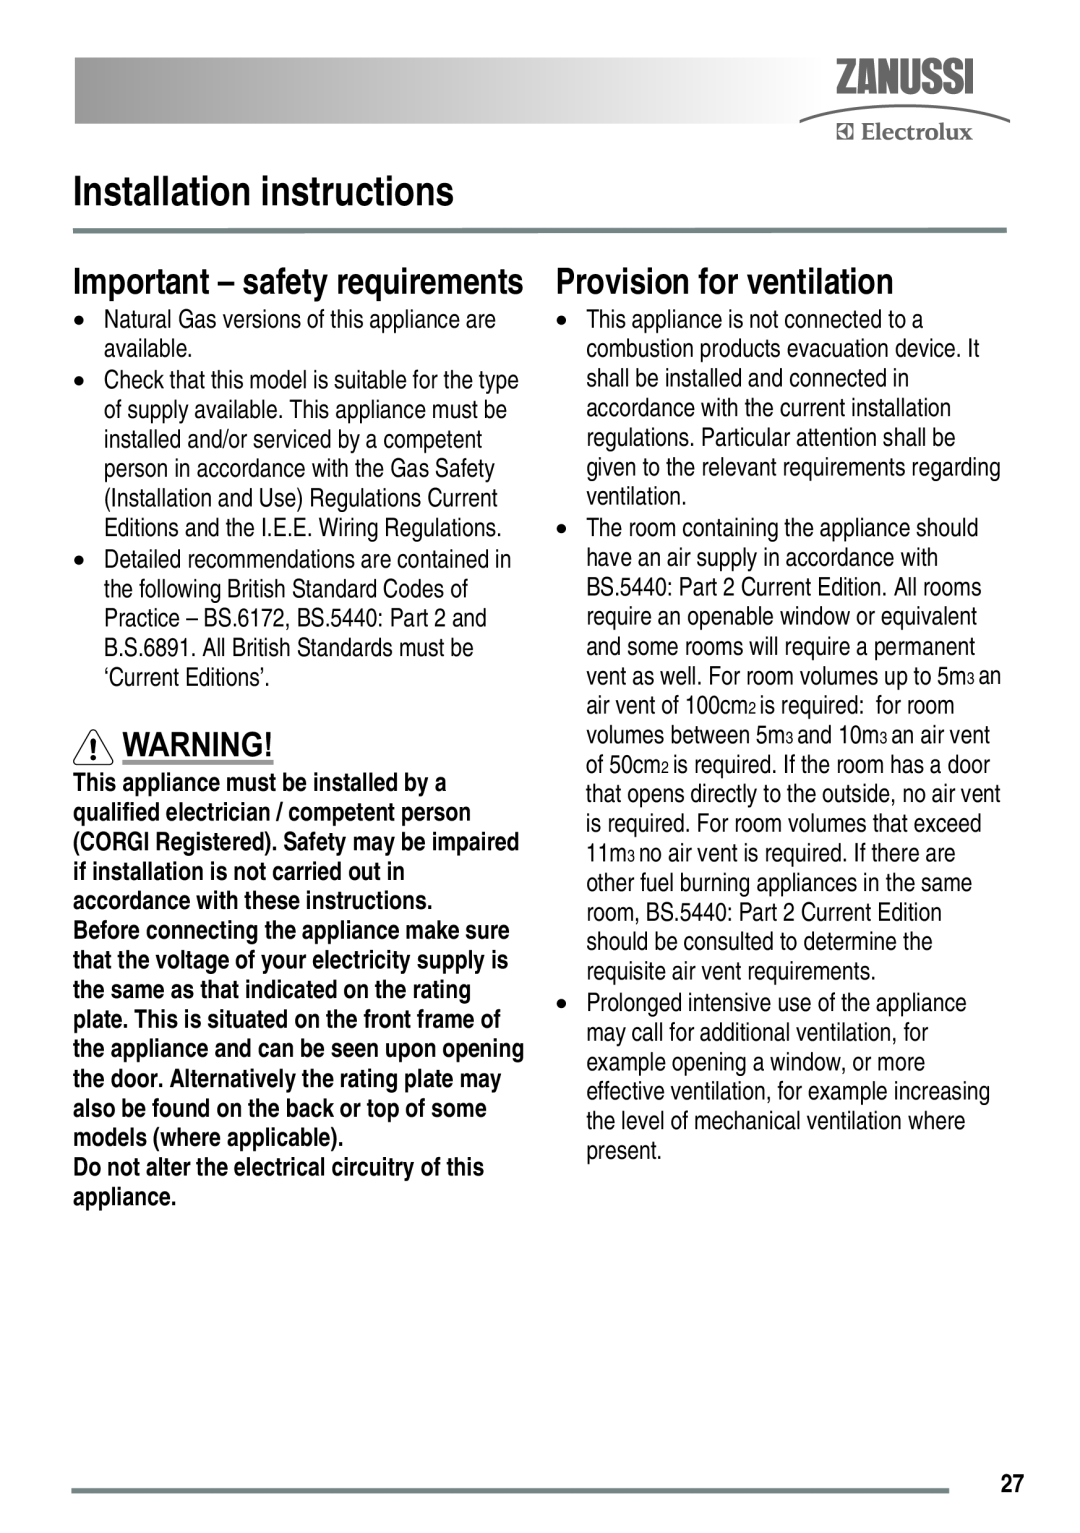 Zanussi ZKG5020 manual Installation instructions, Provision for ventilation, Important - safety requirements 